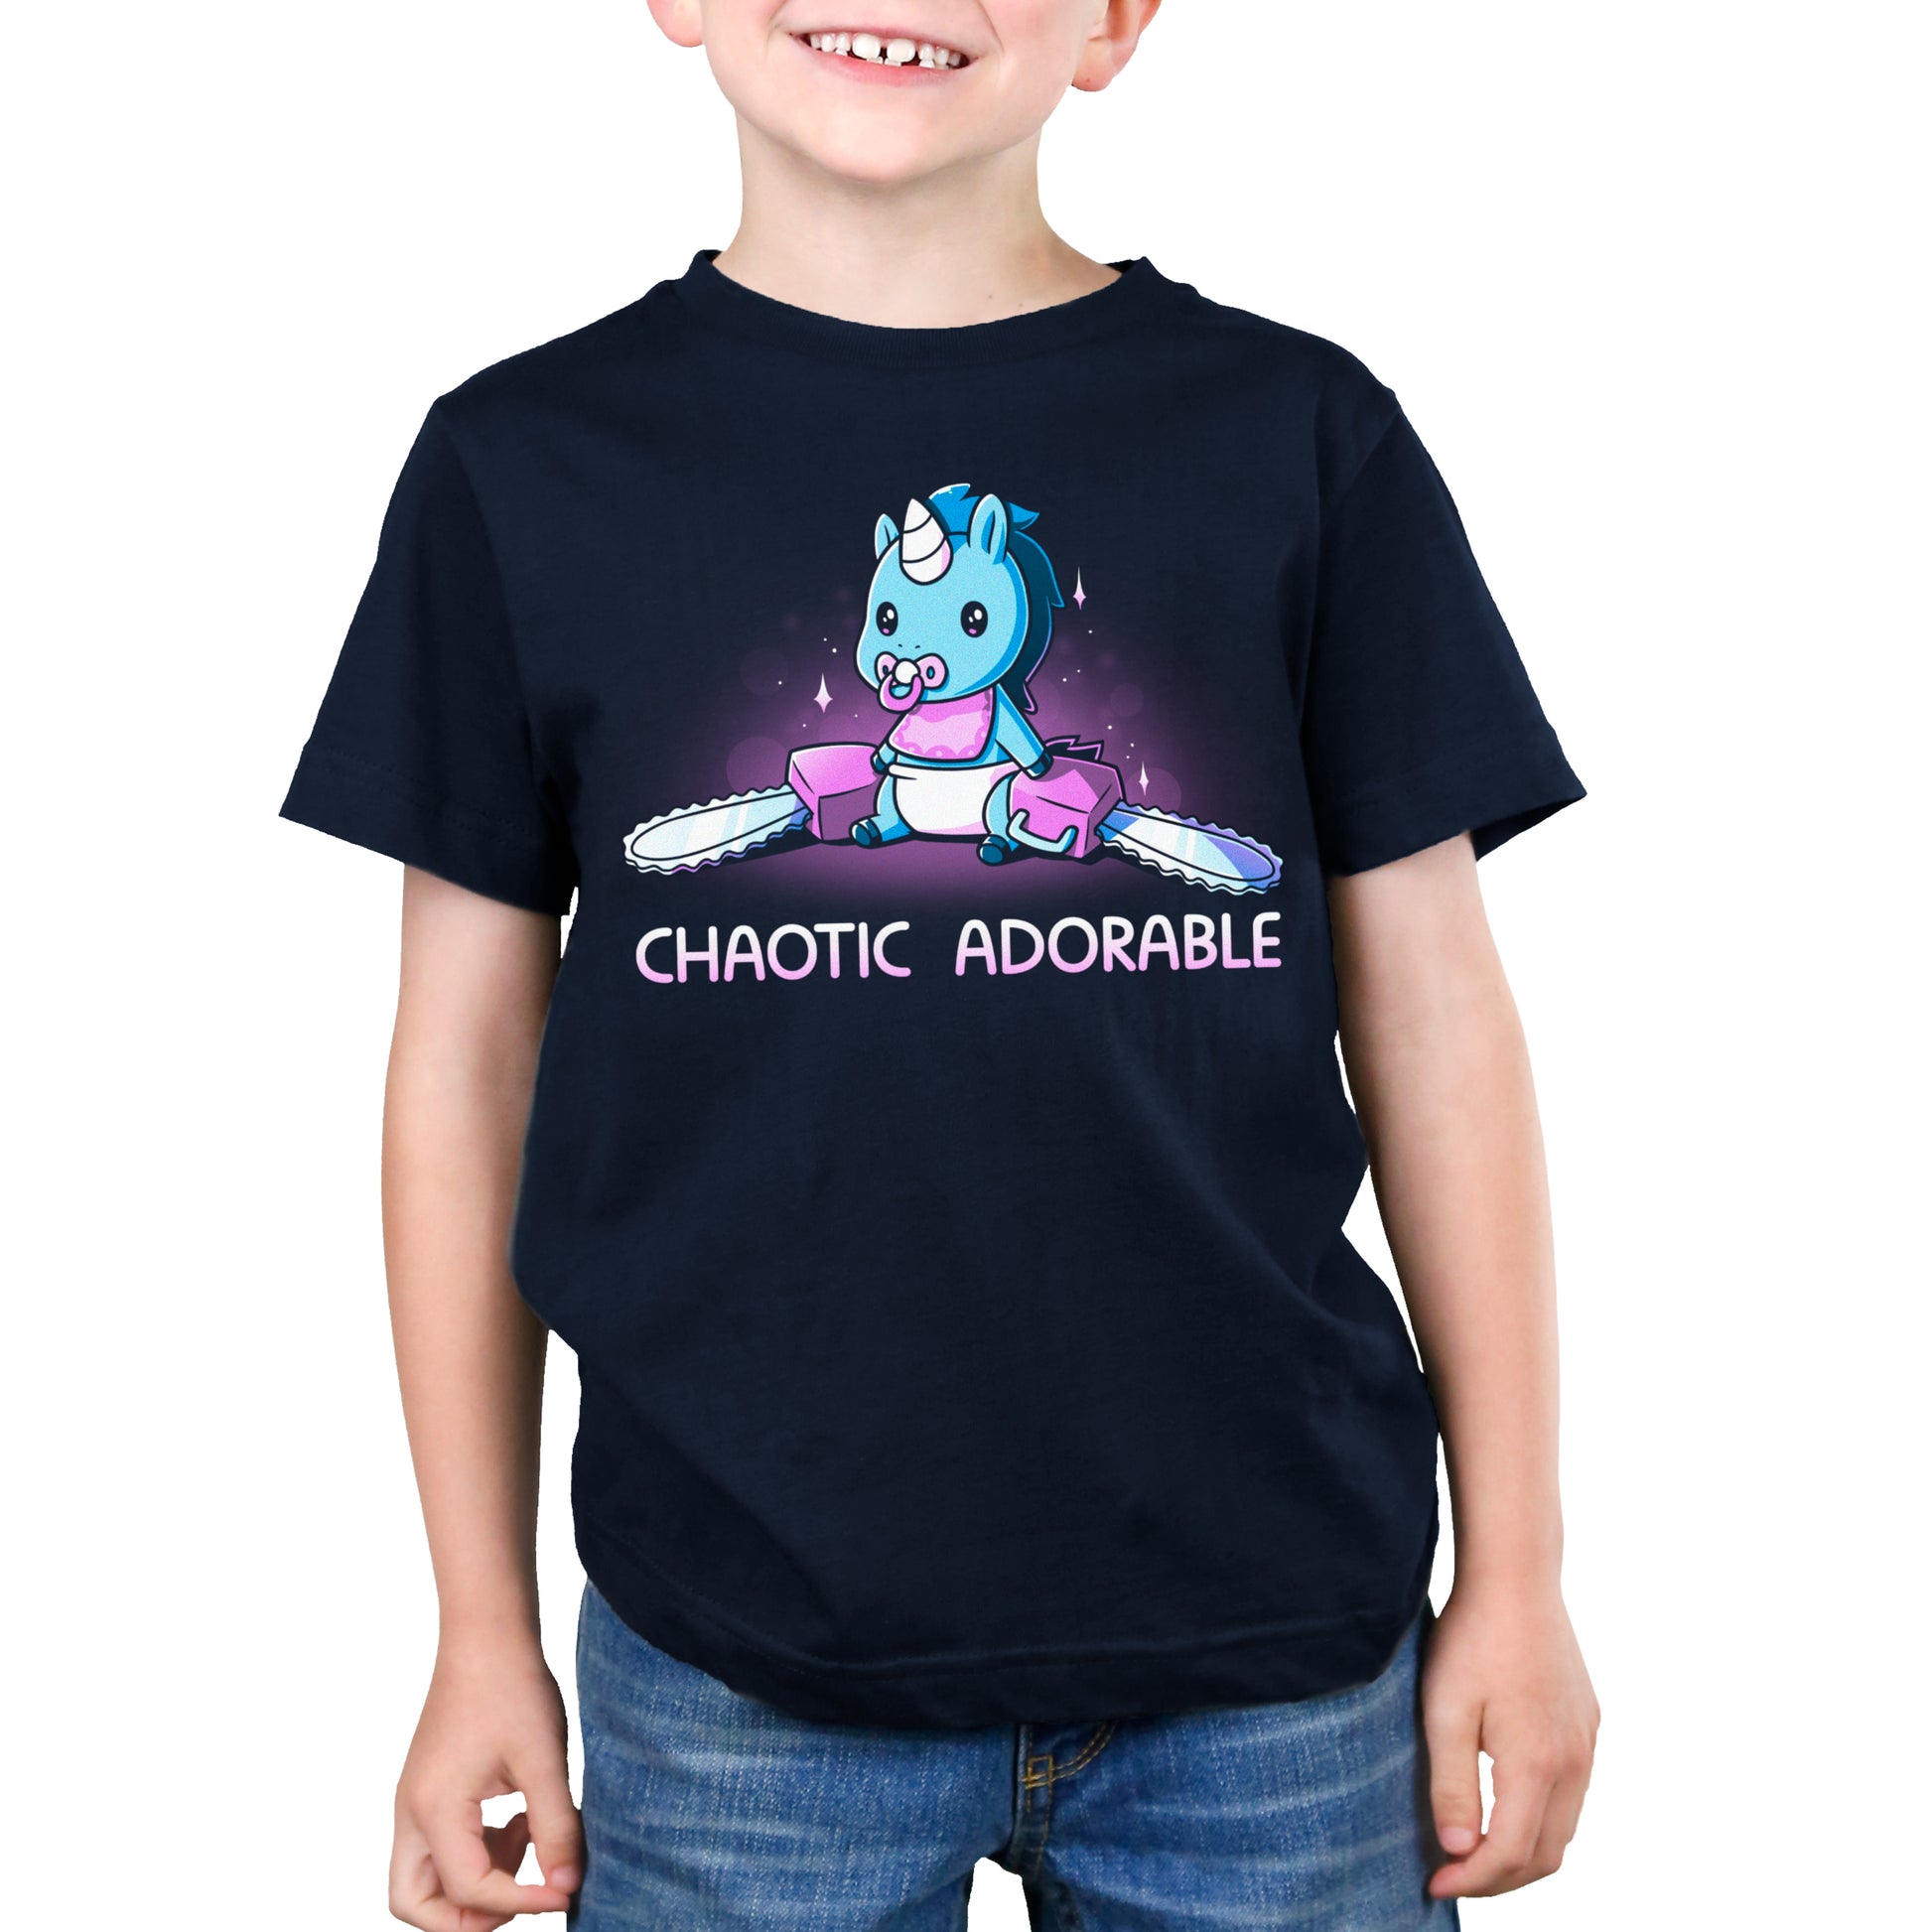 A boy wearing a navy blue t-shirt that says TeeTurtle Chaotic Adorable.